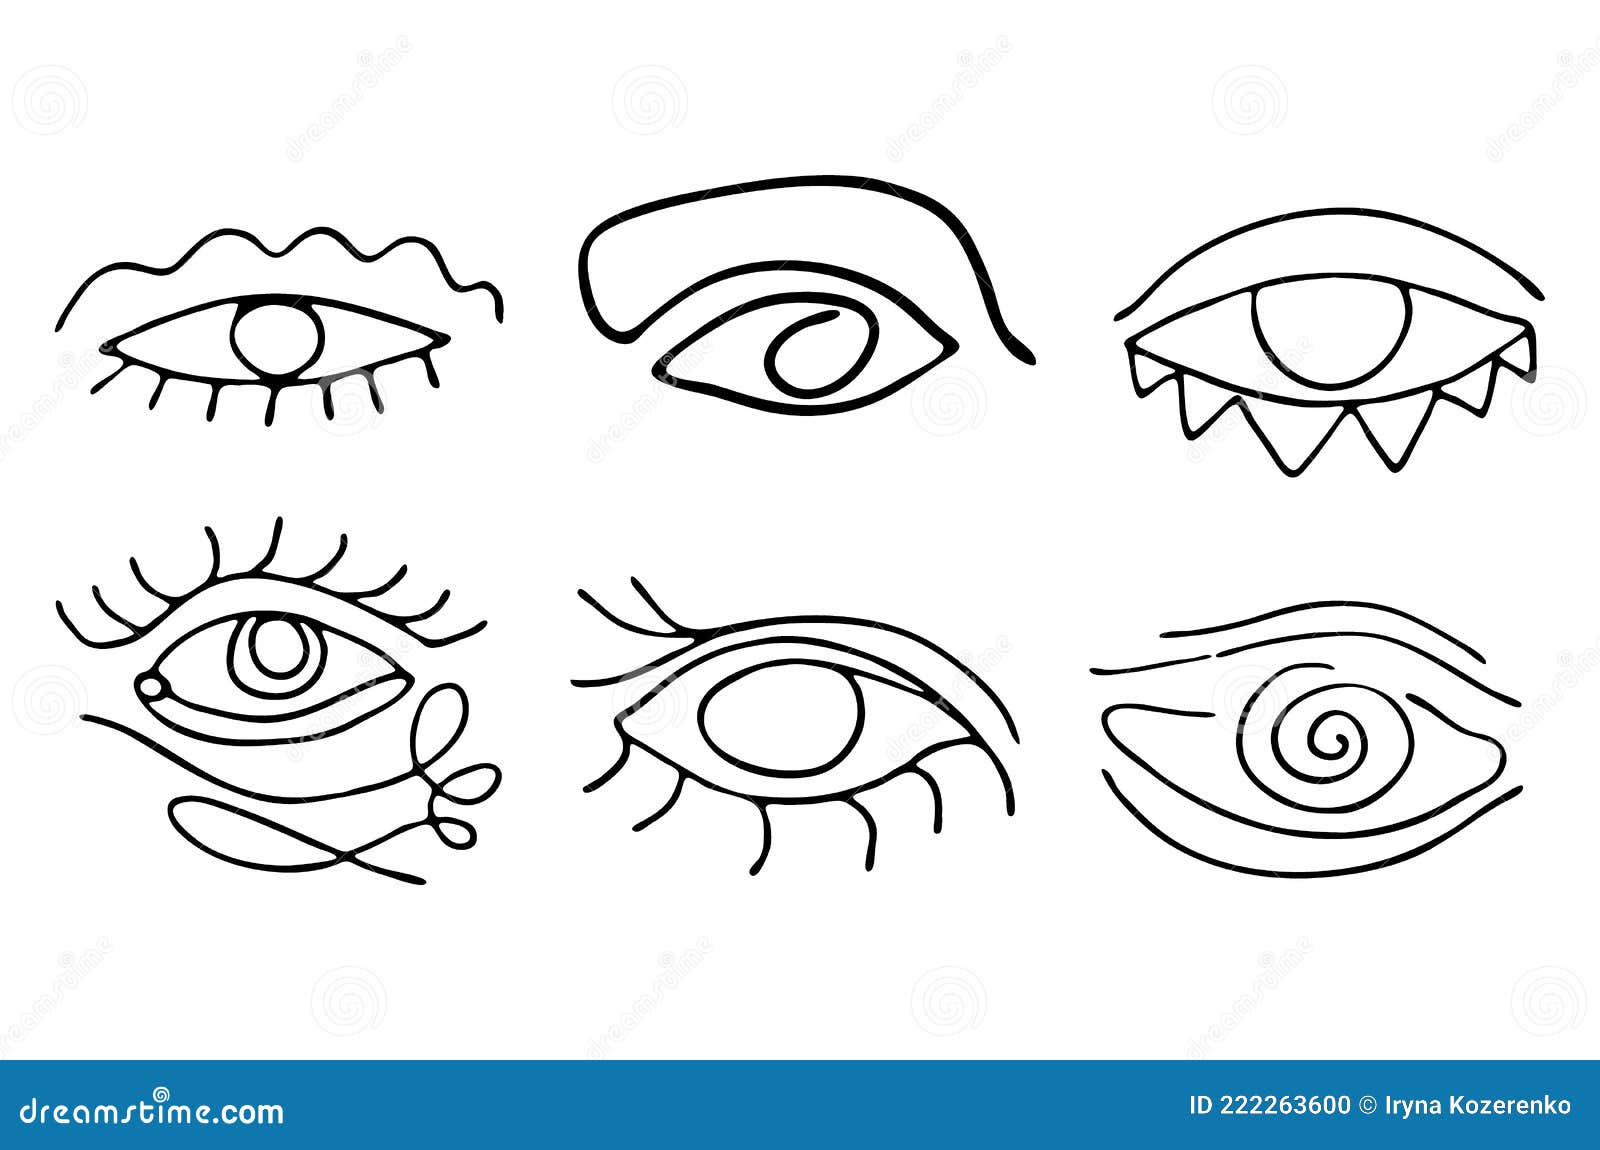 Hand Drawing Abstract Female Eyes Line Art Isolated on White Background ...